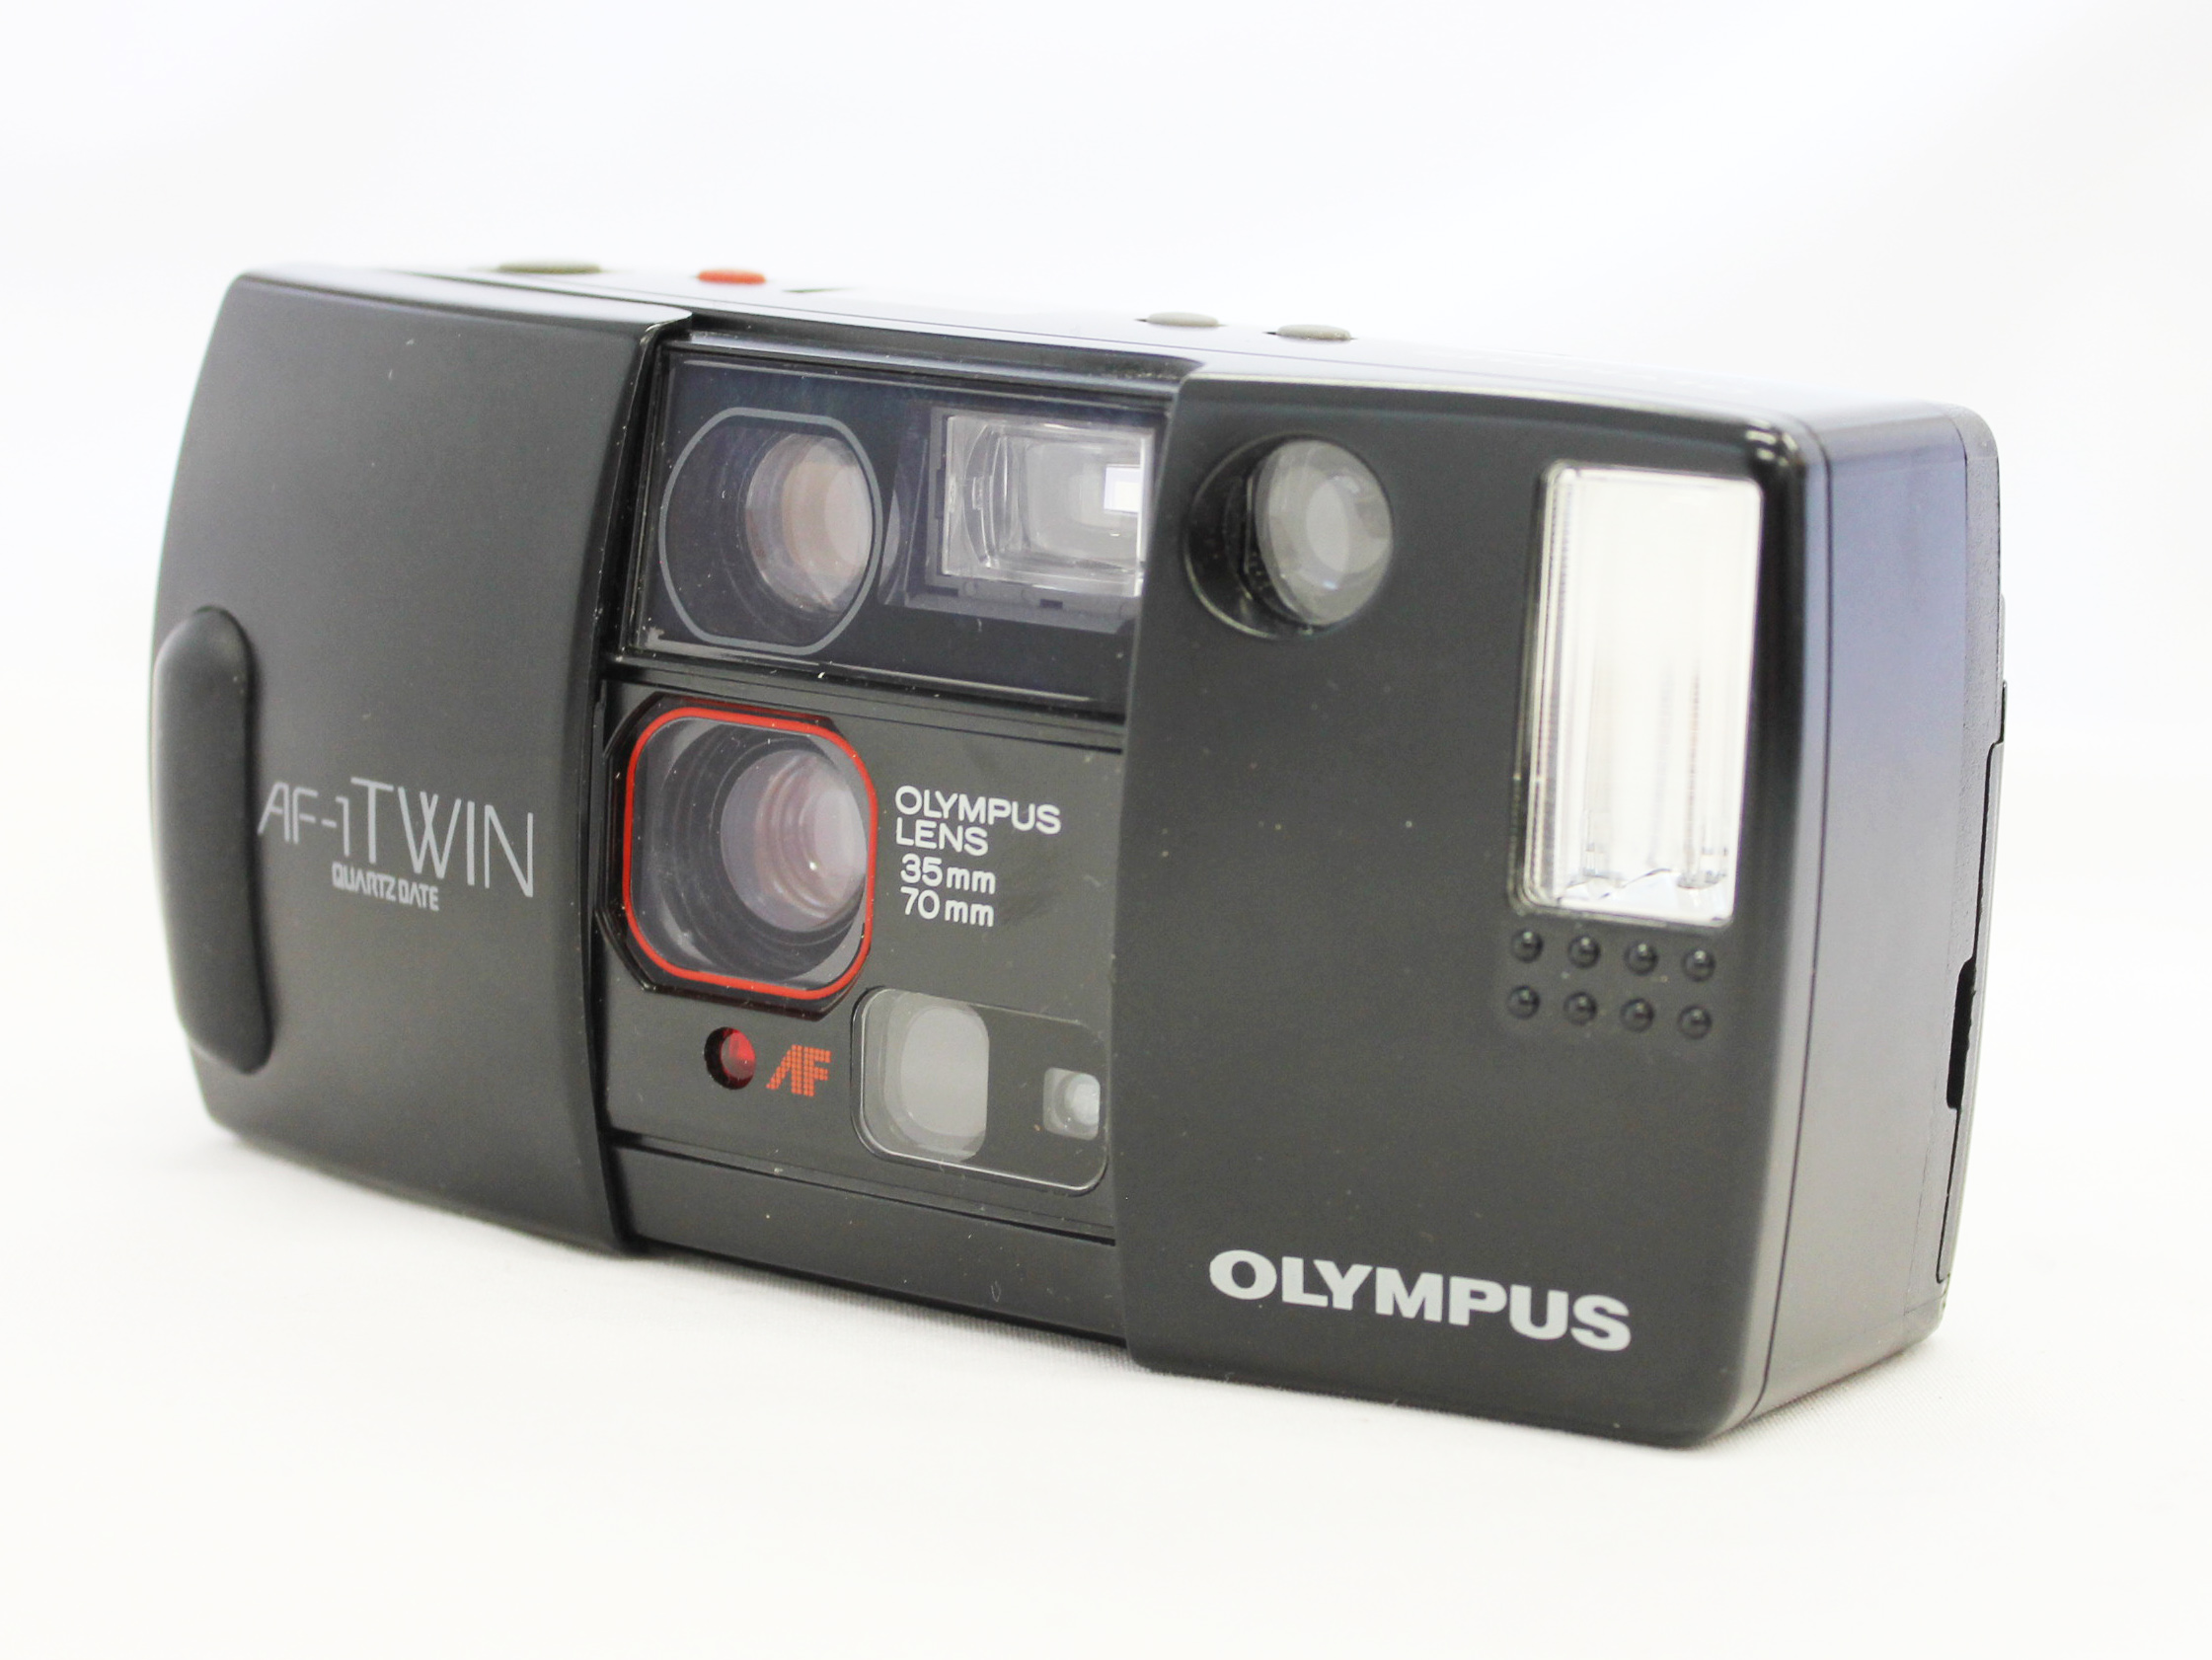 Japan Used Camera Shop | [Near Mint] Olympus AF-1 Twin Point & Shoot 35mm Film Camera from Japan